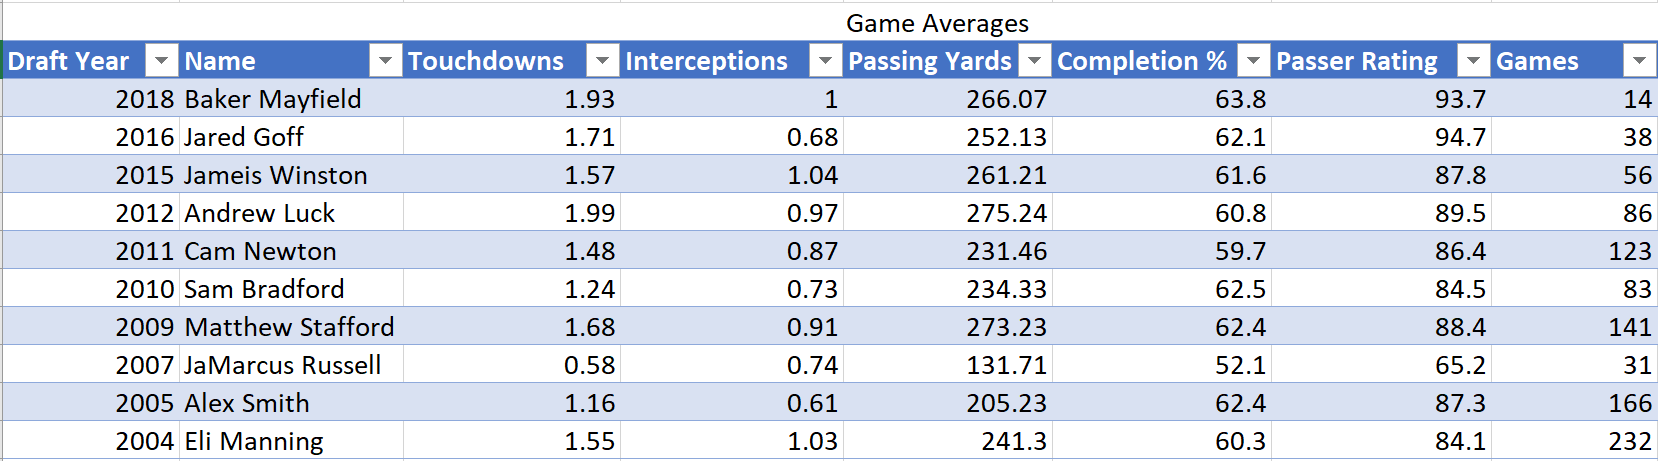 #1 Pick QBs Game Averages